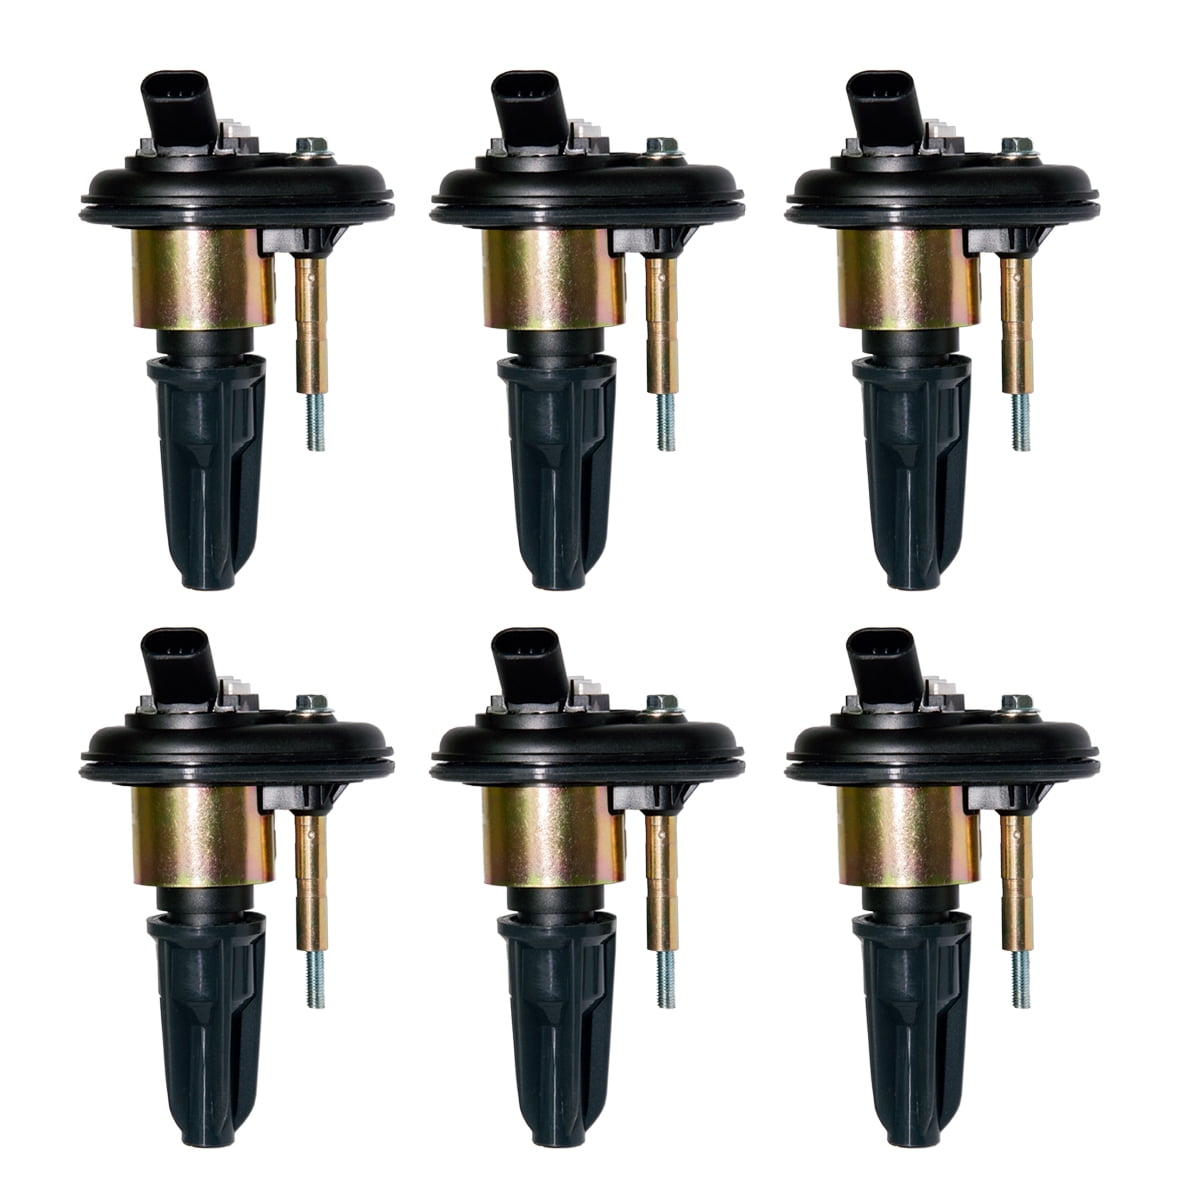 6 MAS Ignition Coil Pack UF303 Replacement for Chevy Trailblazer Colorado Buick Rainier GMC Canyon Envoy Hummer H3 Isuzu Olds Saab 2.8L 3.5L 4.2L 